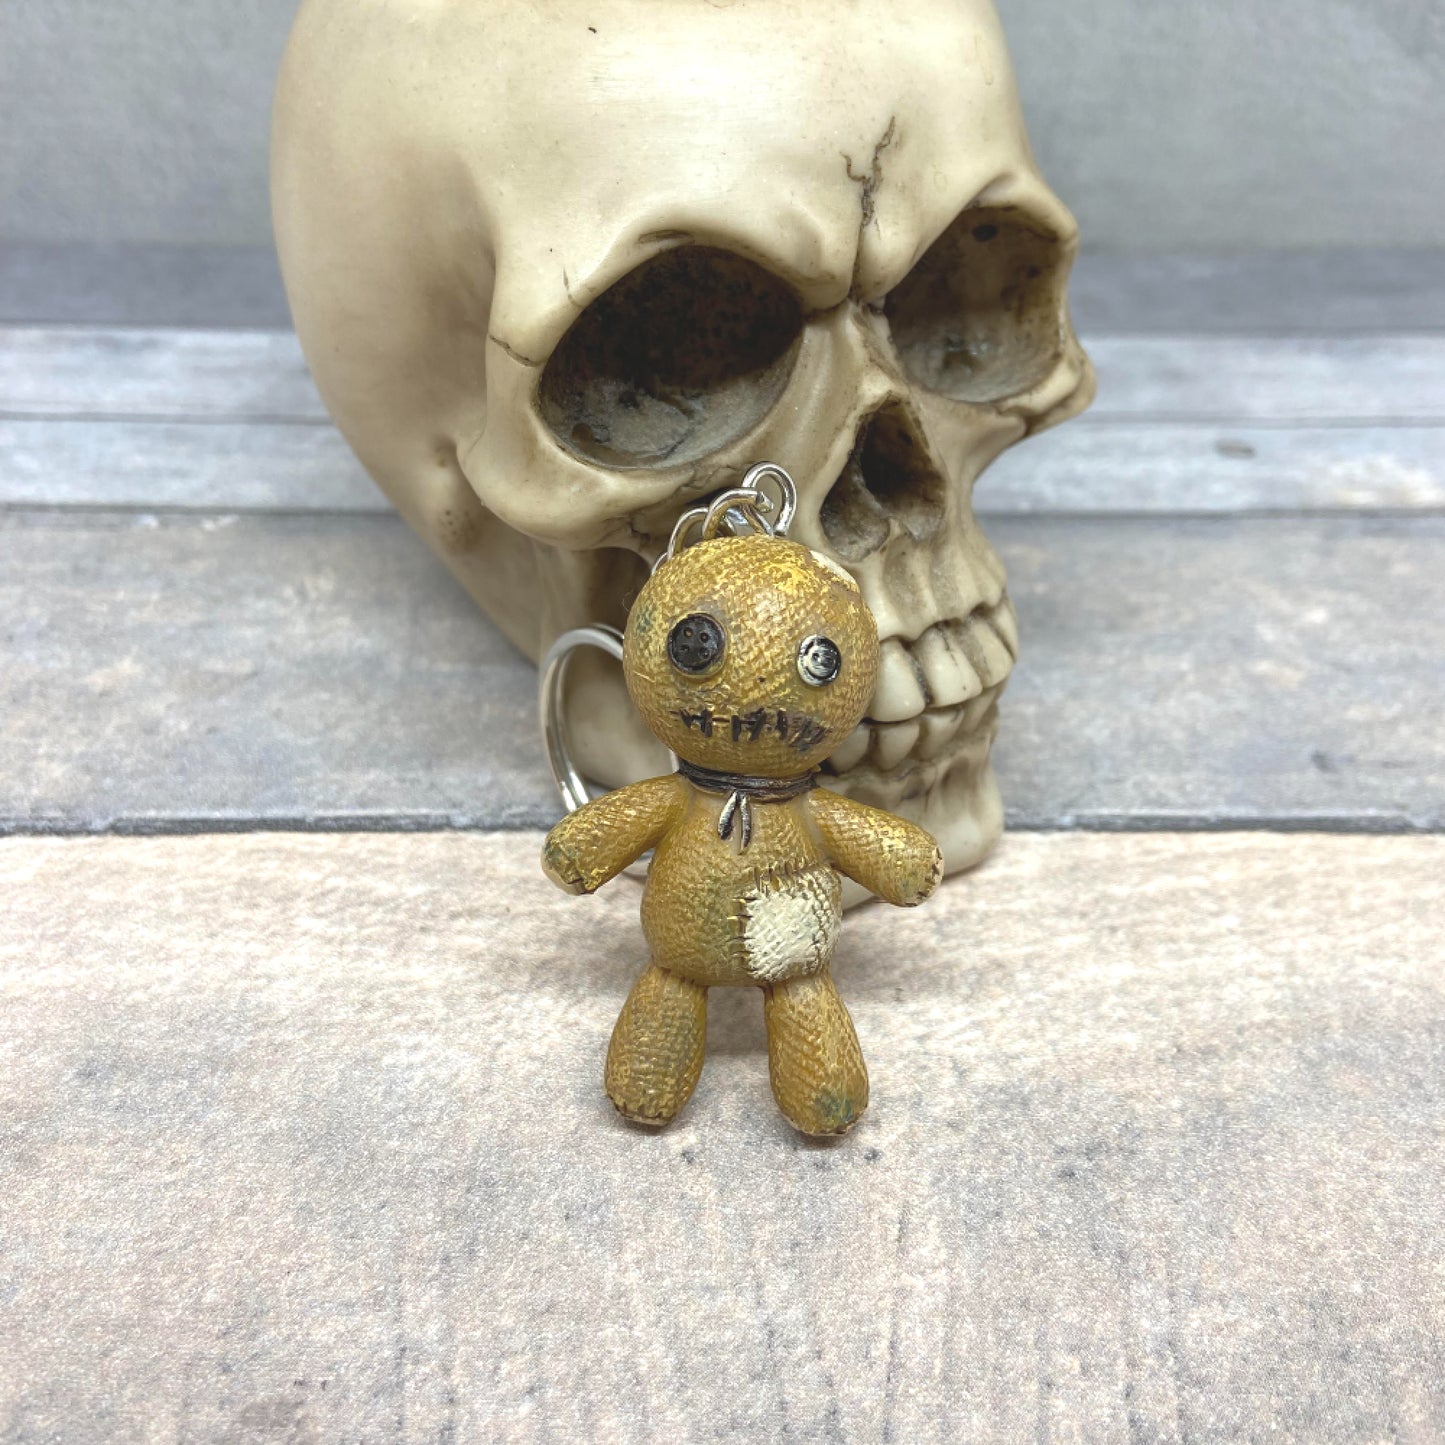 These cute little resin voodoo doll keyrings have buttons for eyes, a stitched mouth and a body covered with patches. A fun little addition to your set of keys or to hang from your purse or wallet.  Size: 6cm